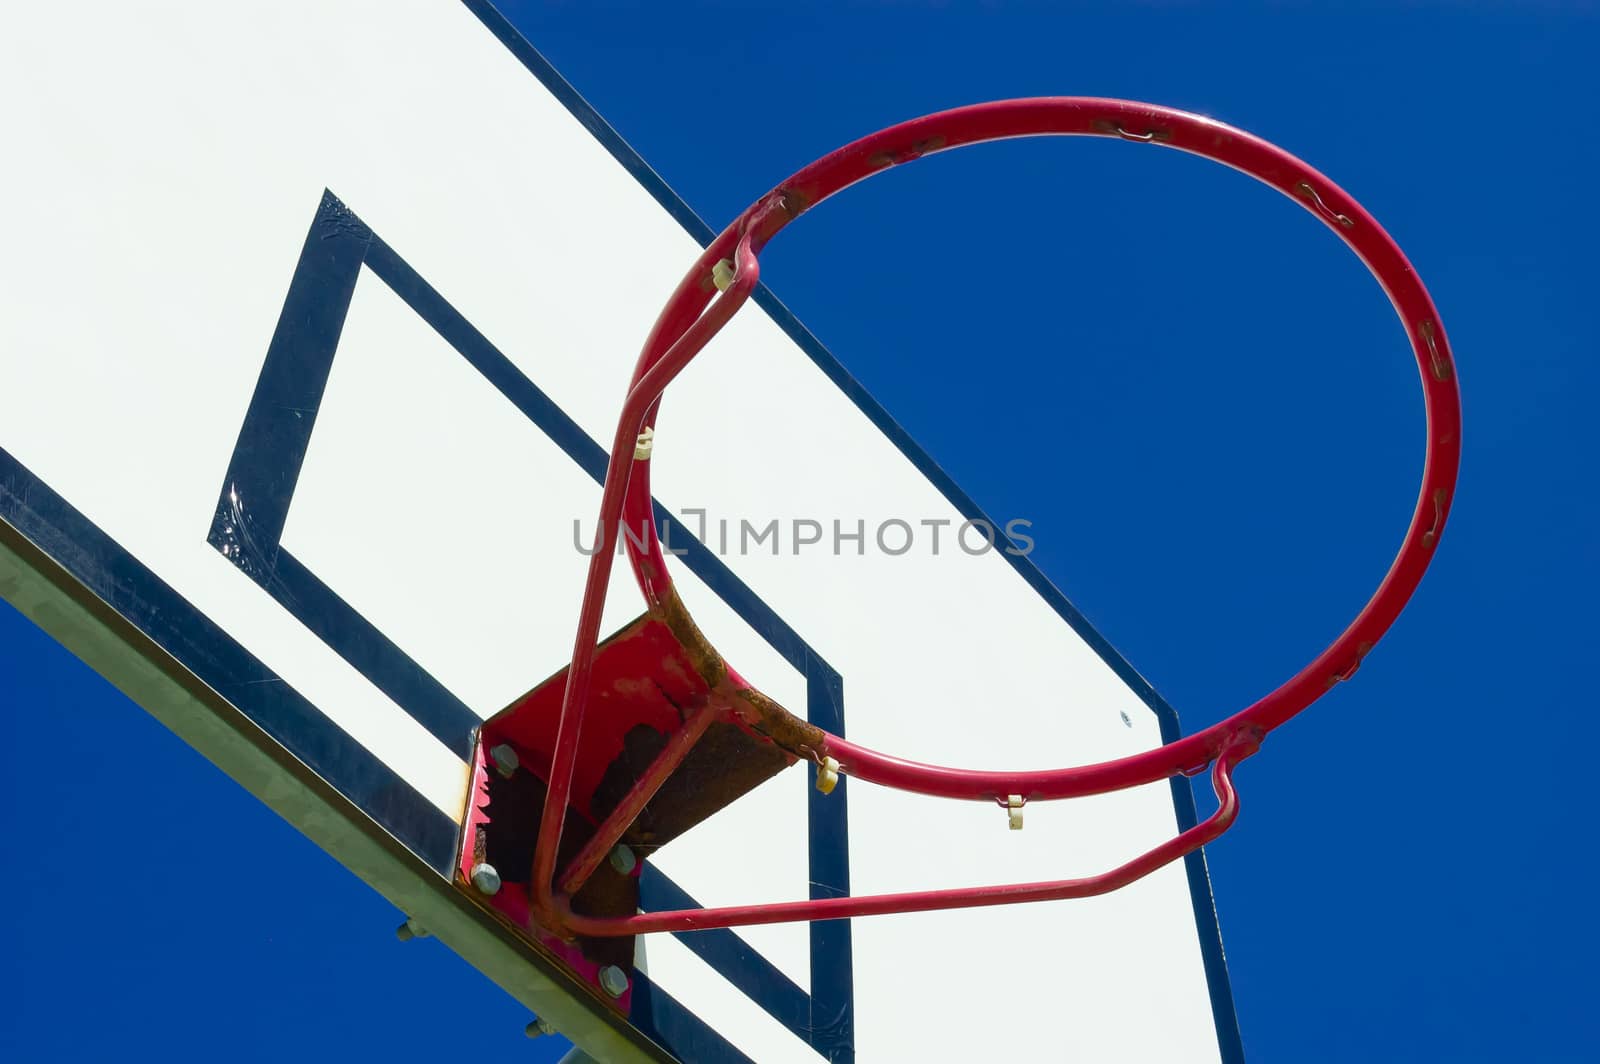 An element of the basket-ball game with blue sky